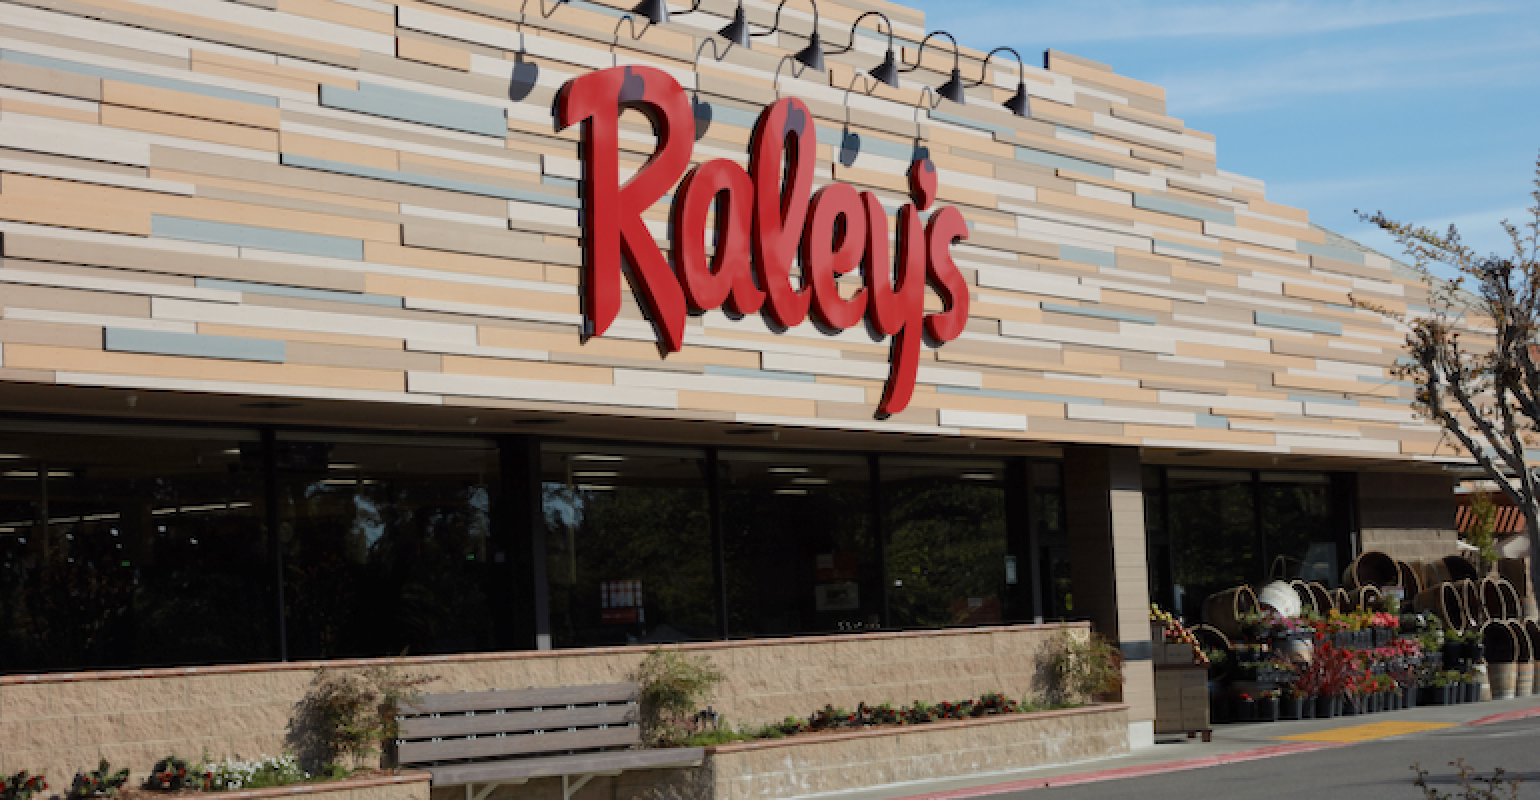 Raley's Family-owned, American Grocery Stores